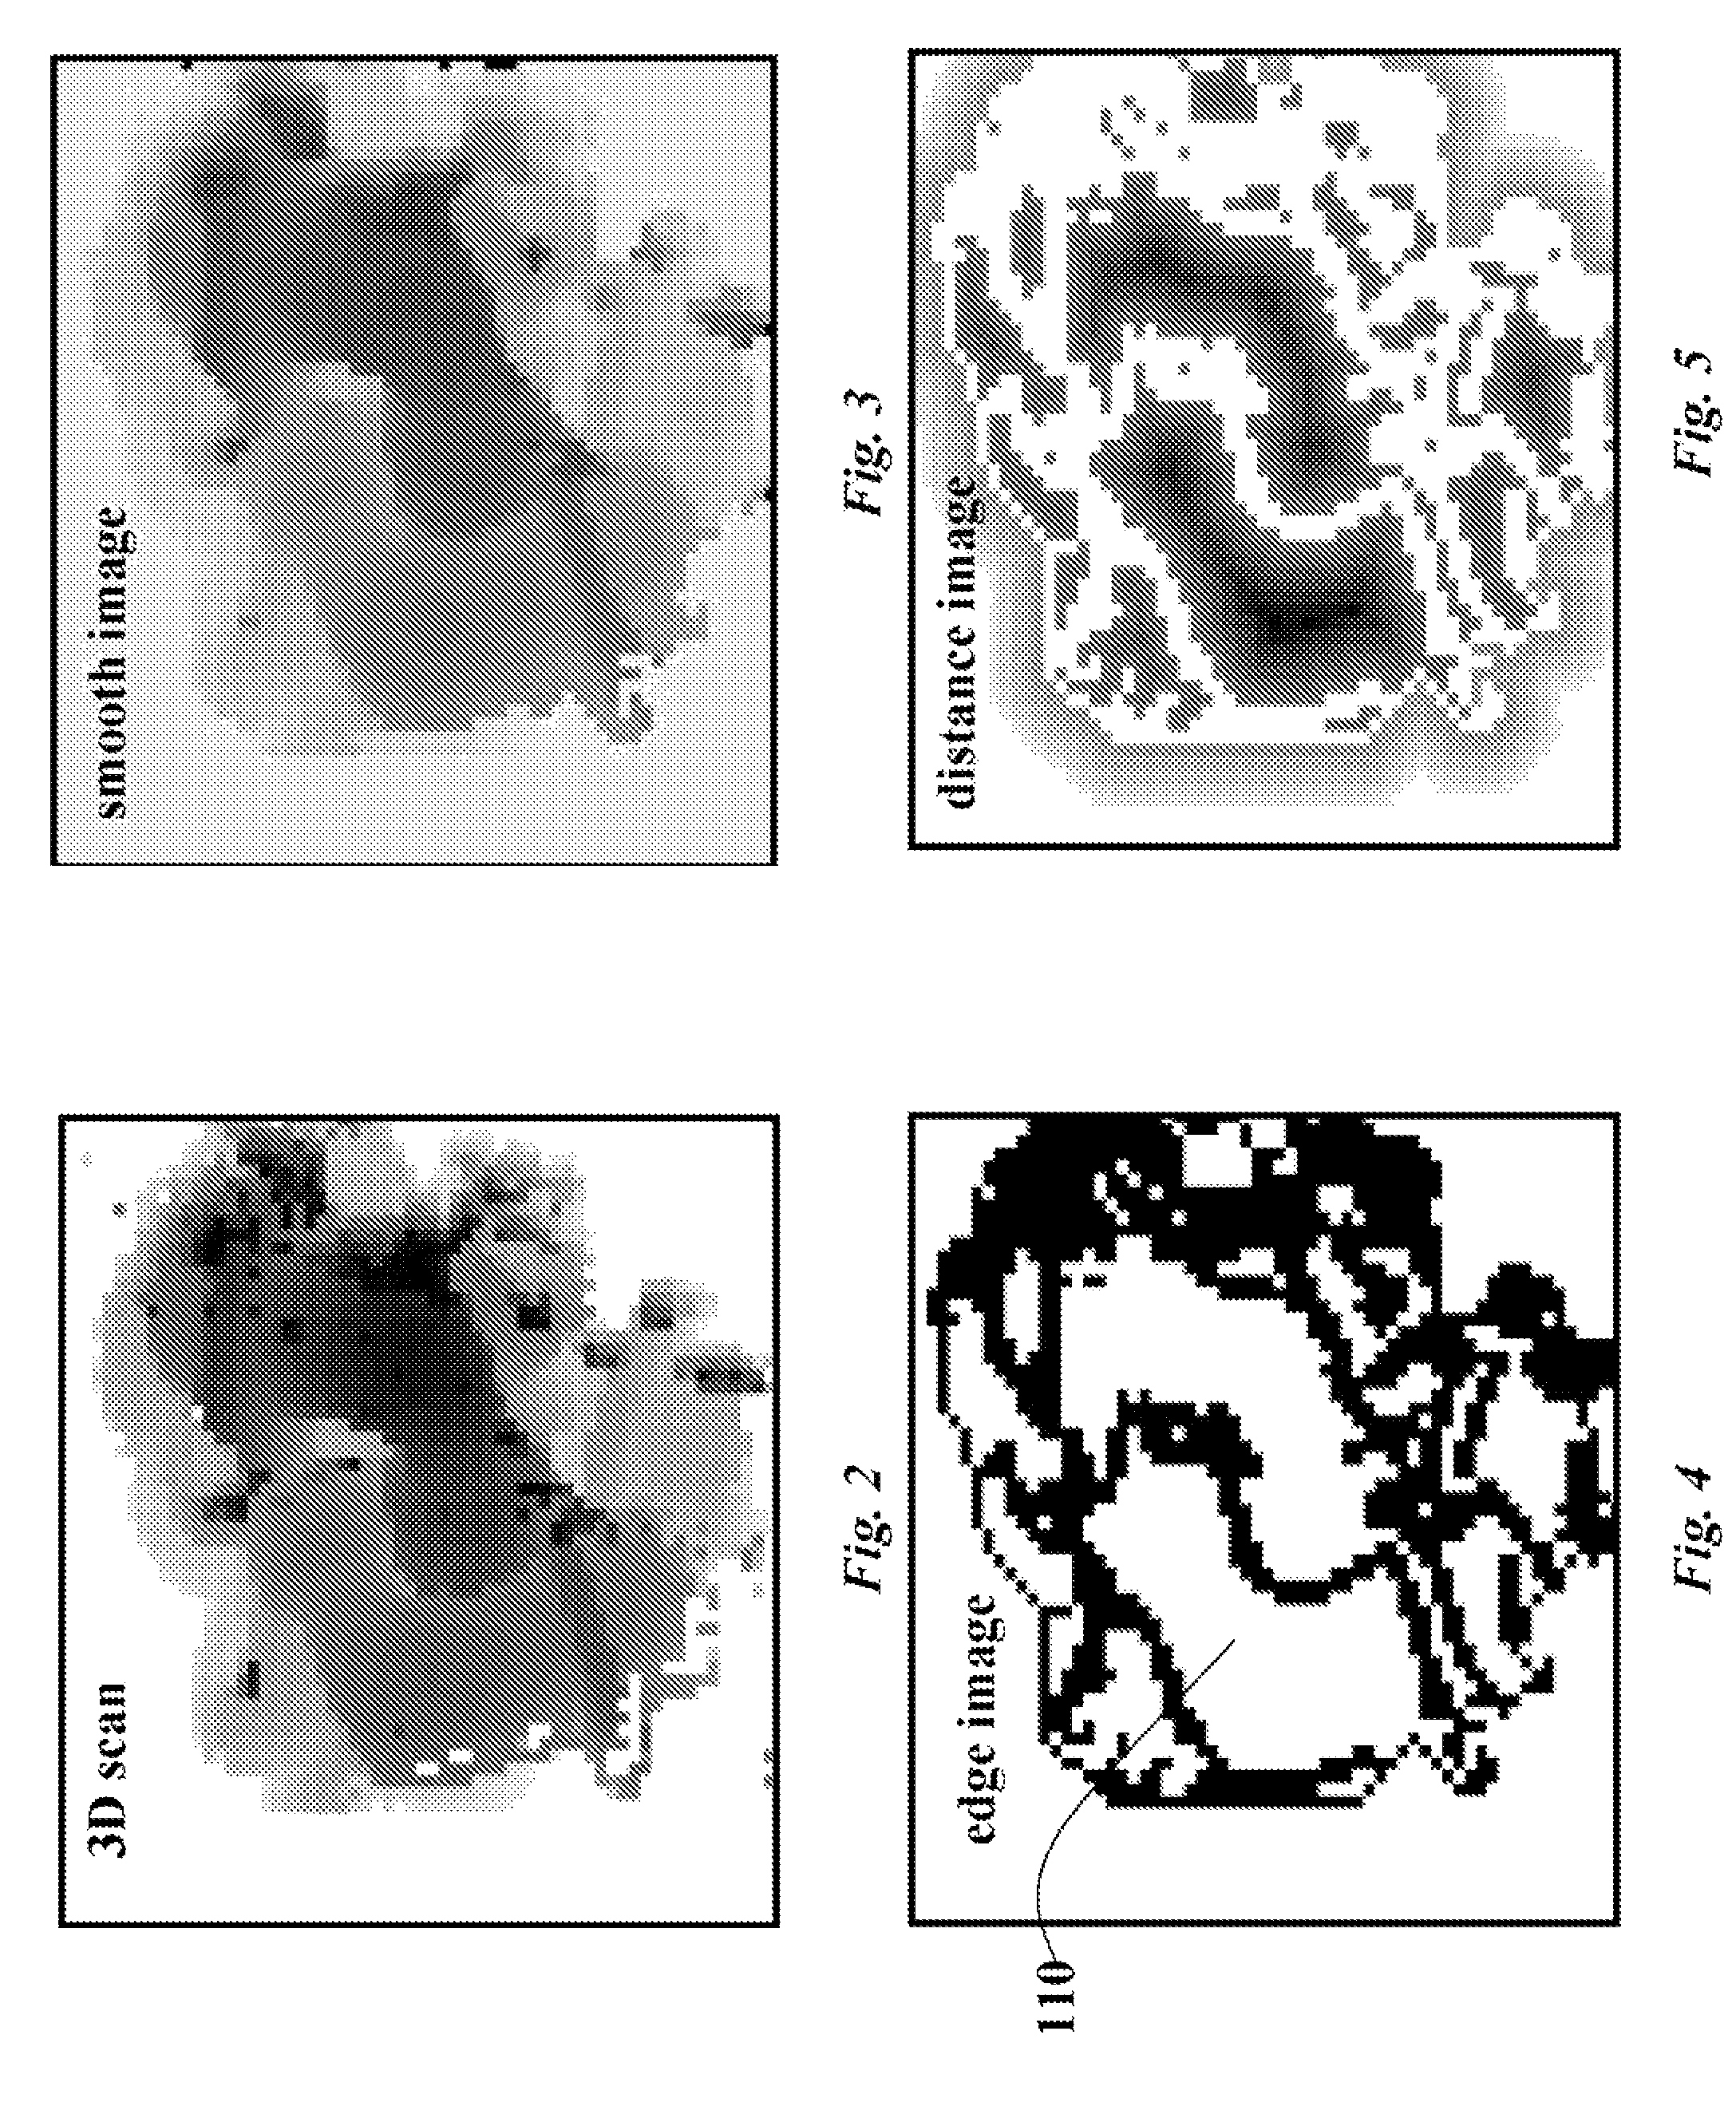 Method and system for determining objects poses from range images